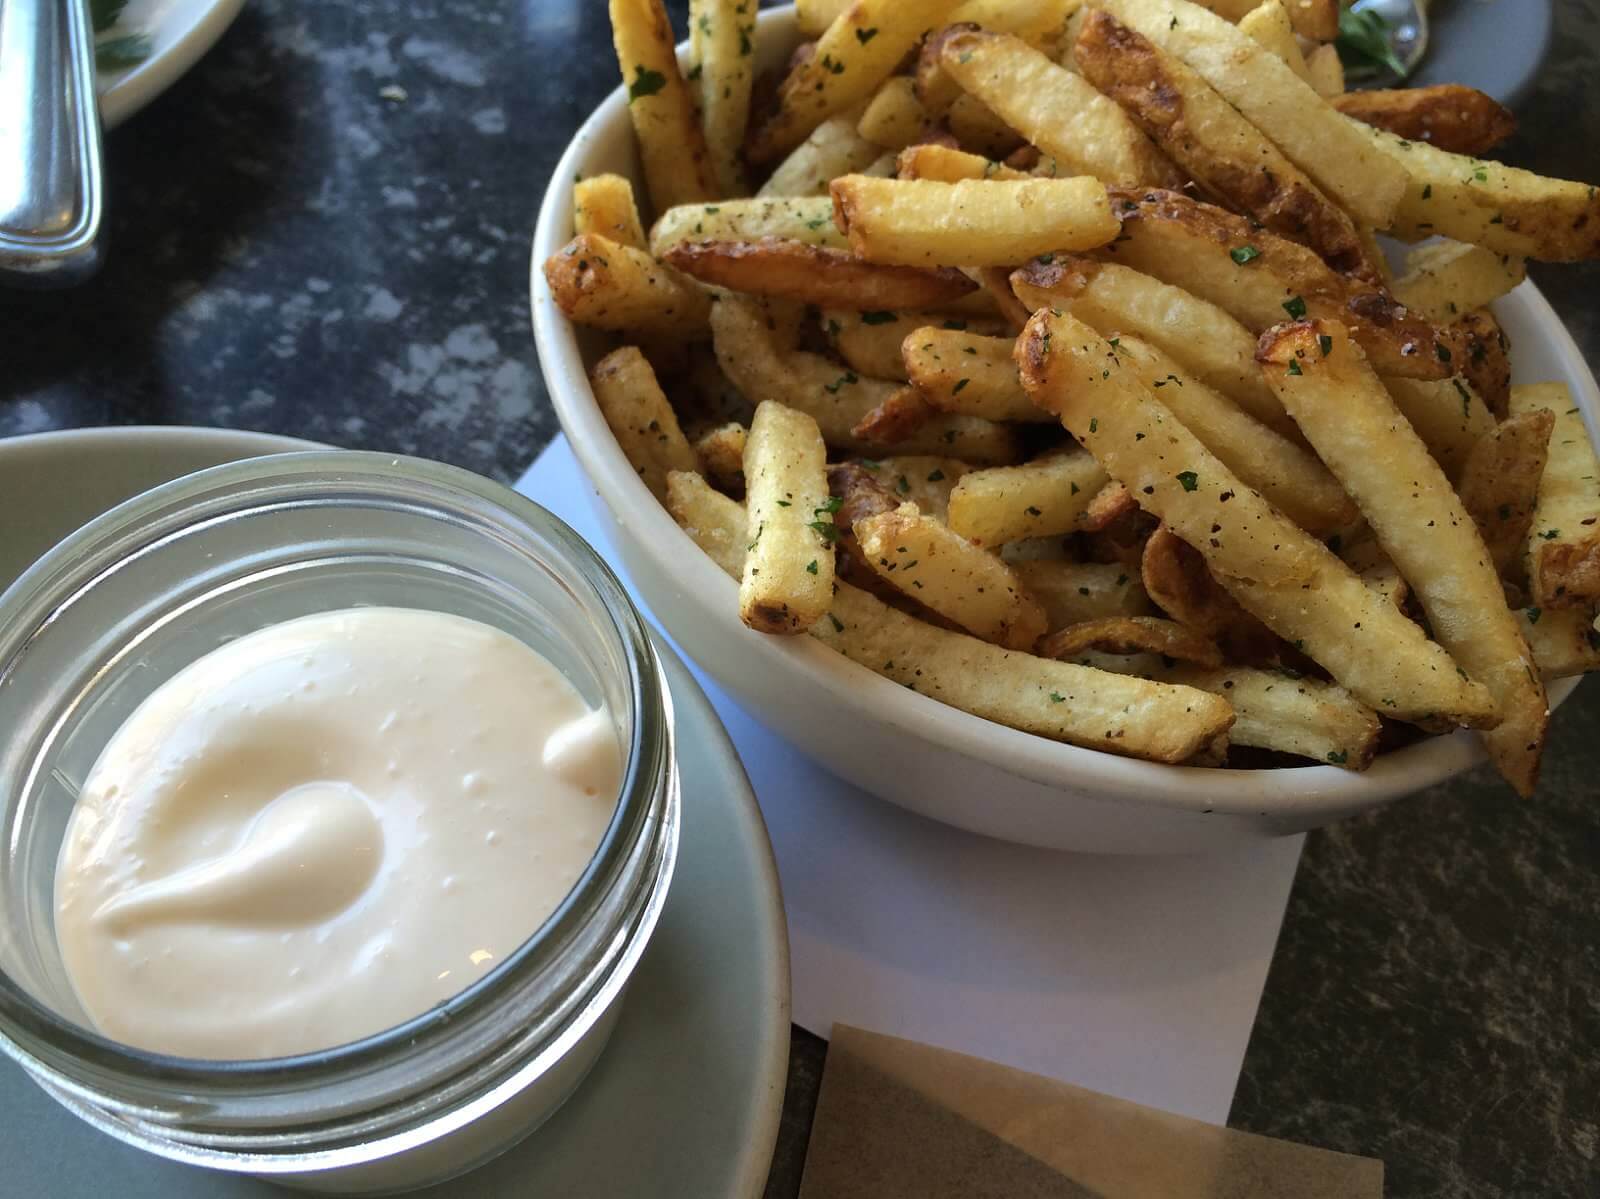 Kennebec Fries, Malt Vinegar Aioli. I love fries but seriously, these were some of the best fries I think I've ever had! 